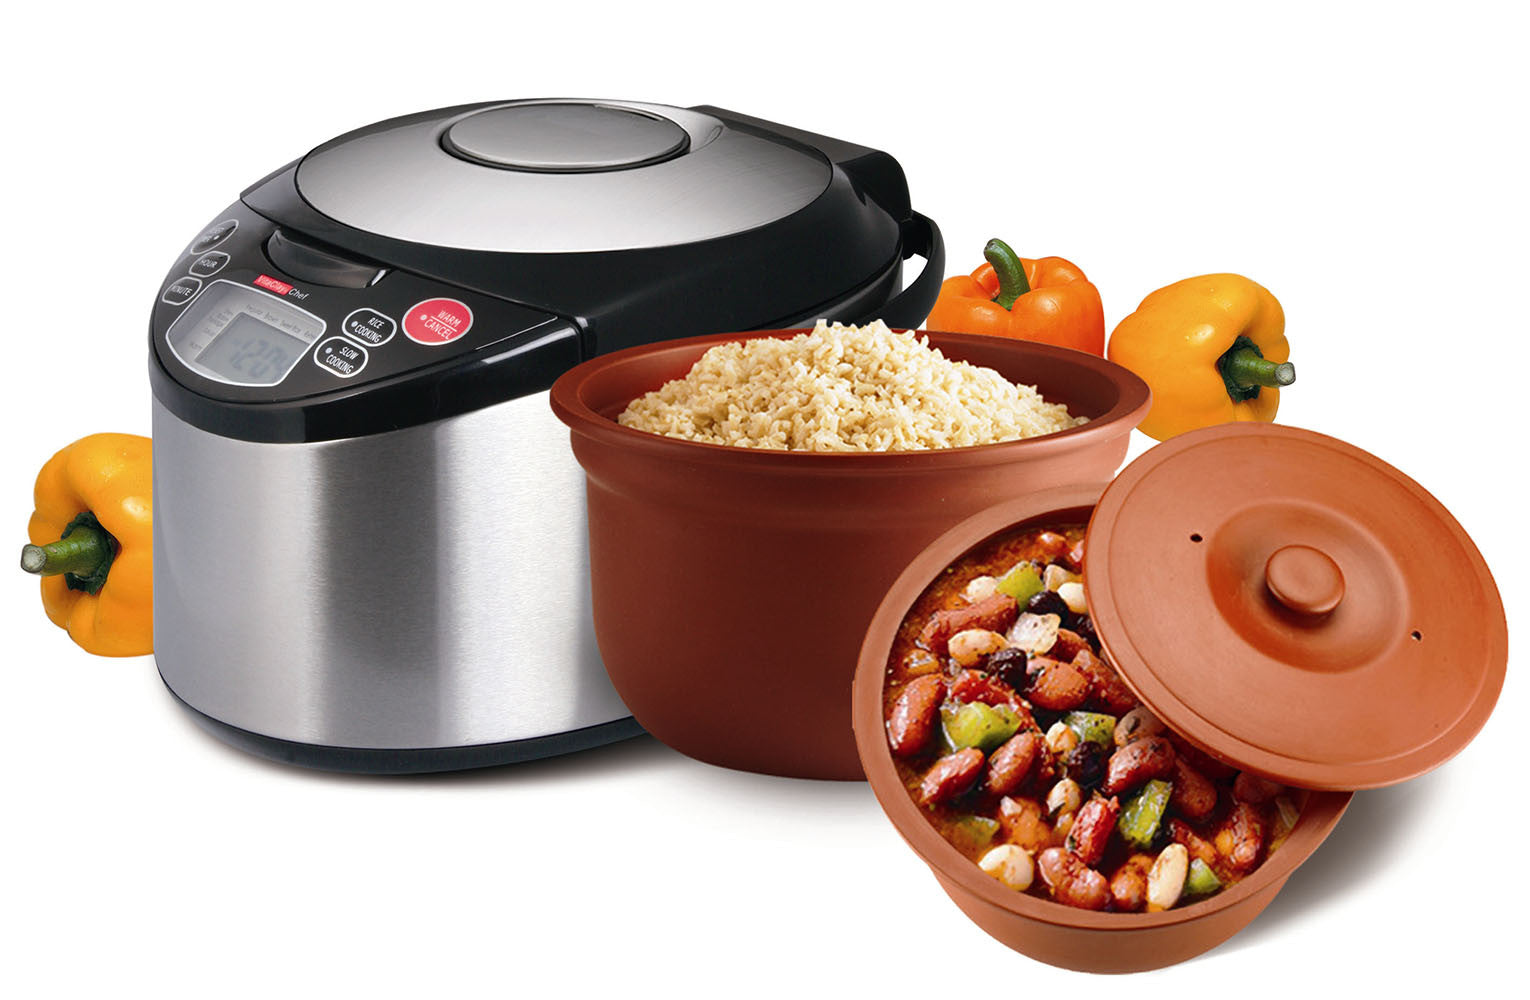 How is VitaClay different from a Pressure Cooker?